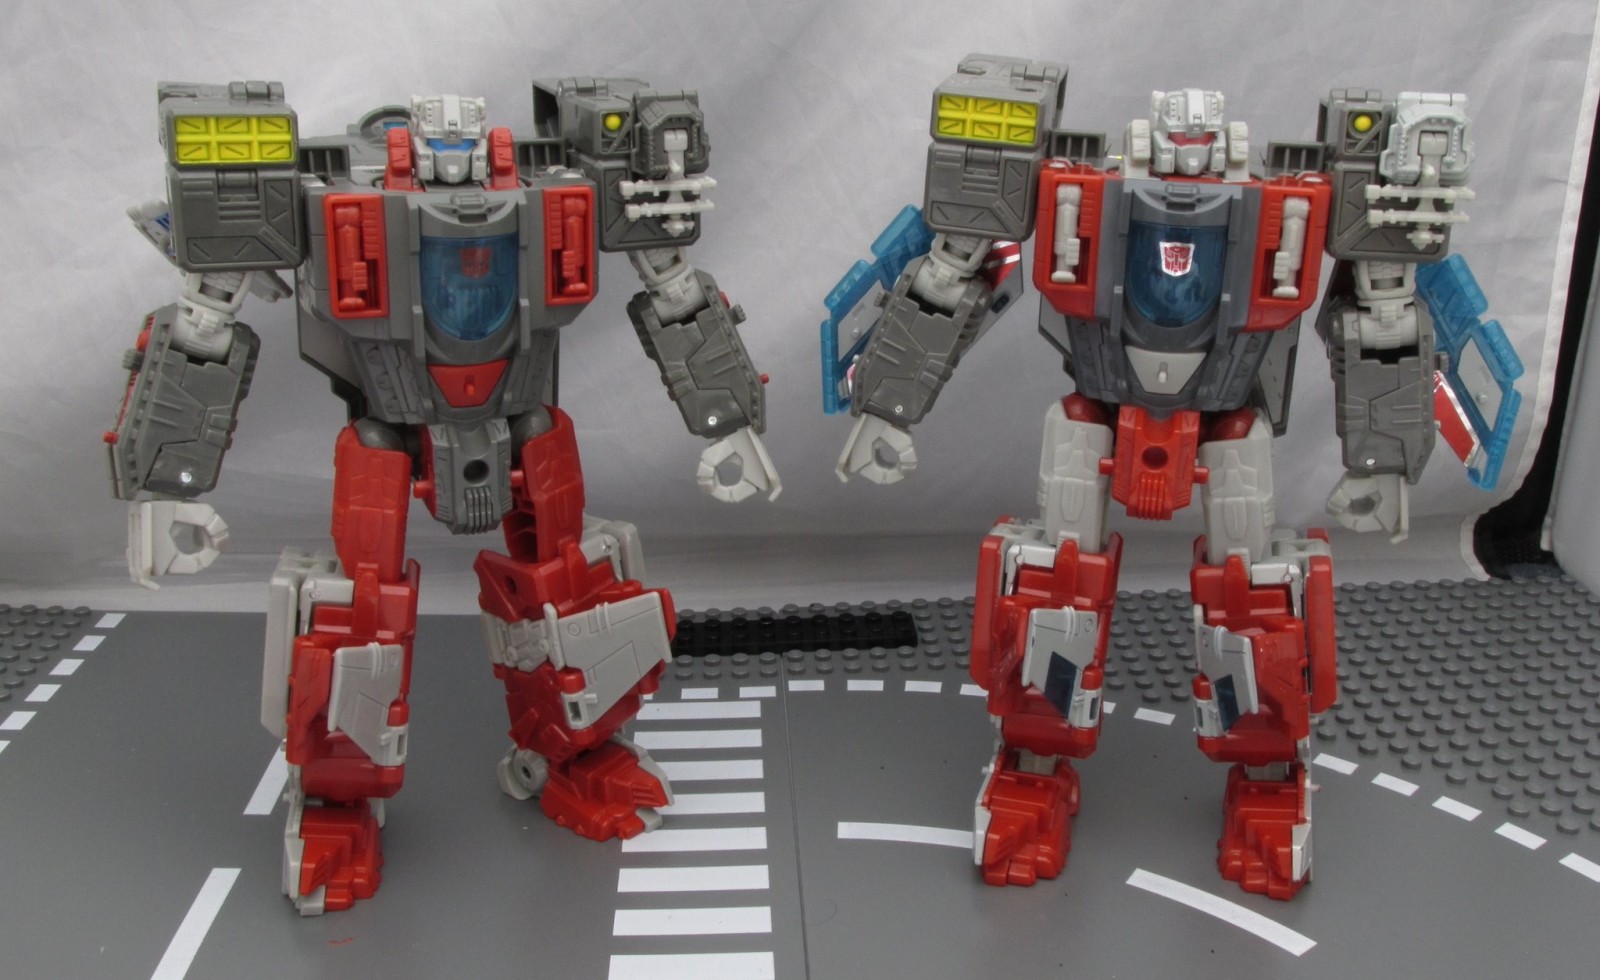 Transformers News: In-Hand Images and Comparisons of Takara Tomy Transformers Legends LG-53 Broadside